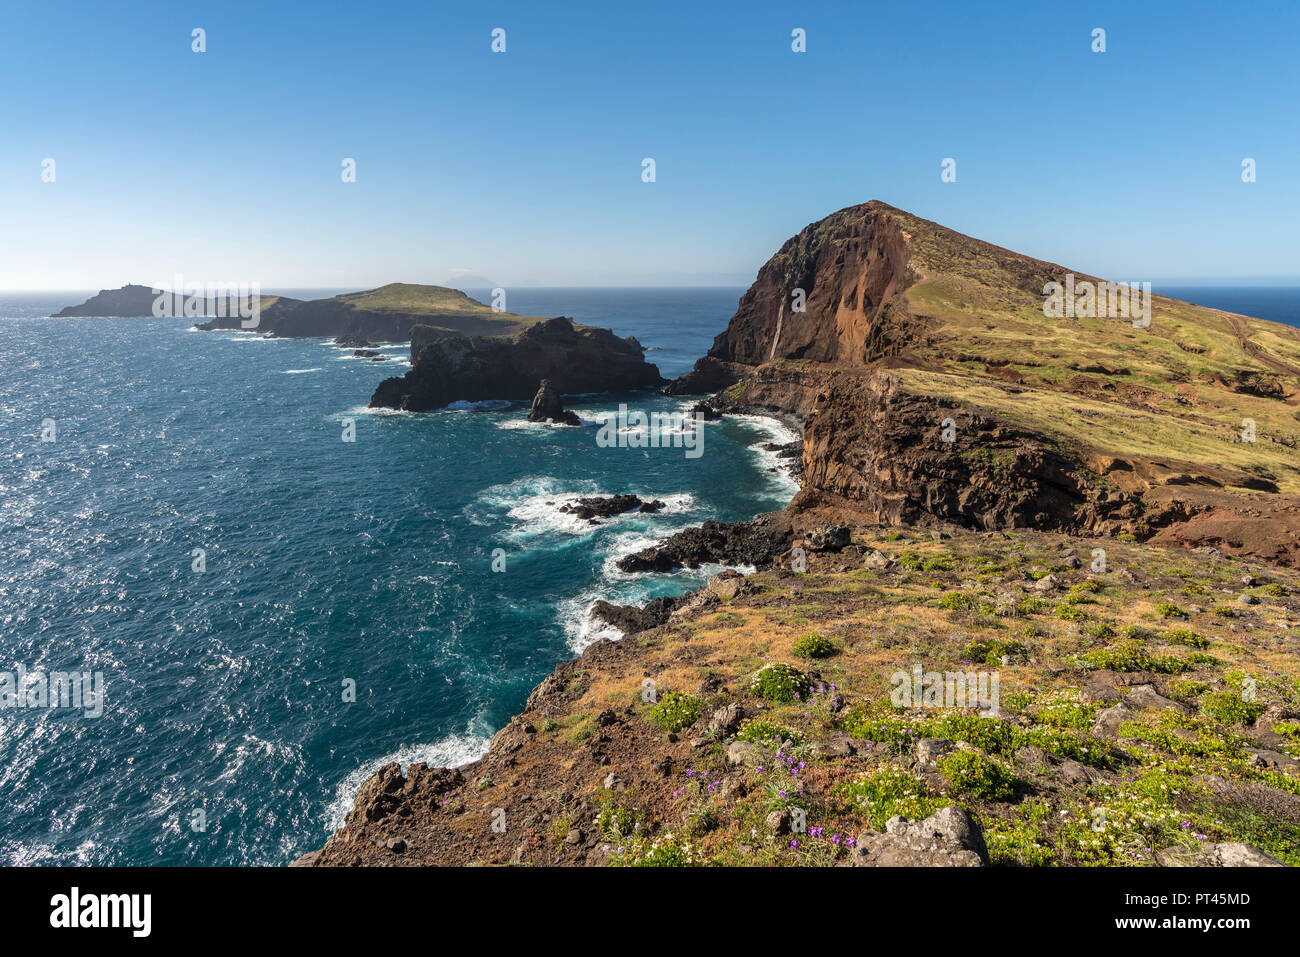 Furado Point and Cevada and Farol islets from Point of St Lawrence, Canical, Machico district, Madeira region, Portugal, Stock Photo